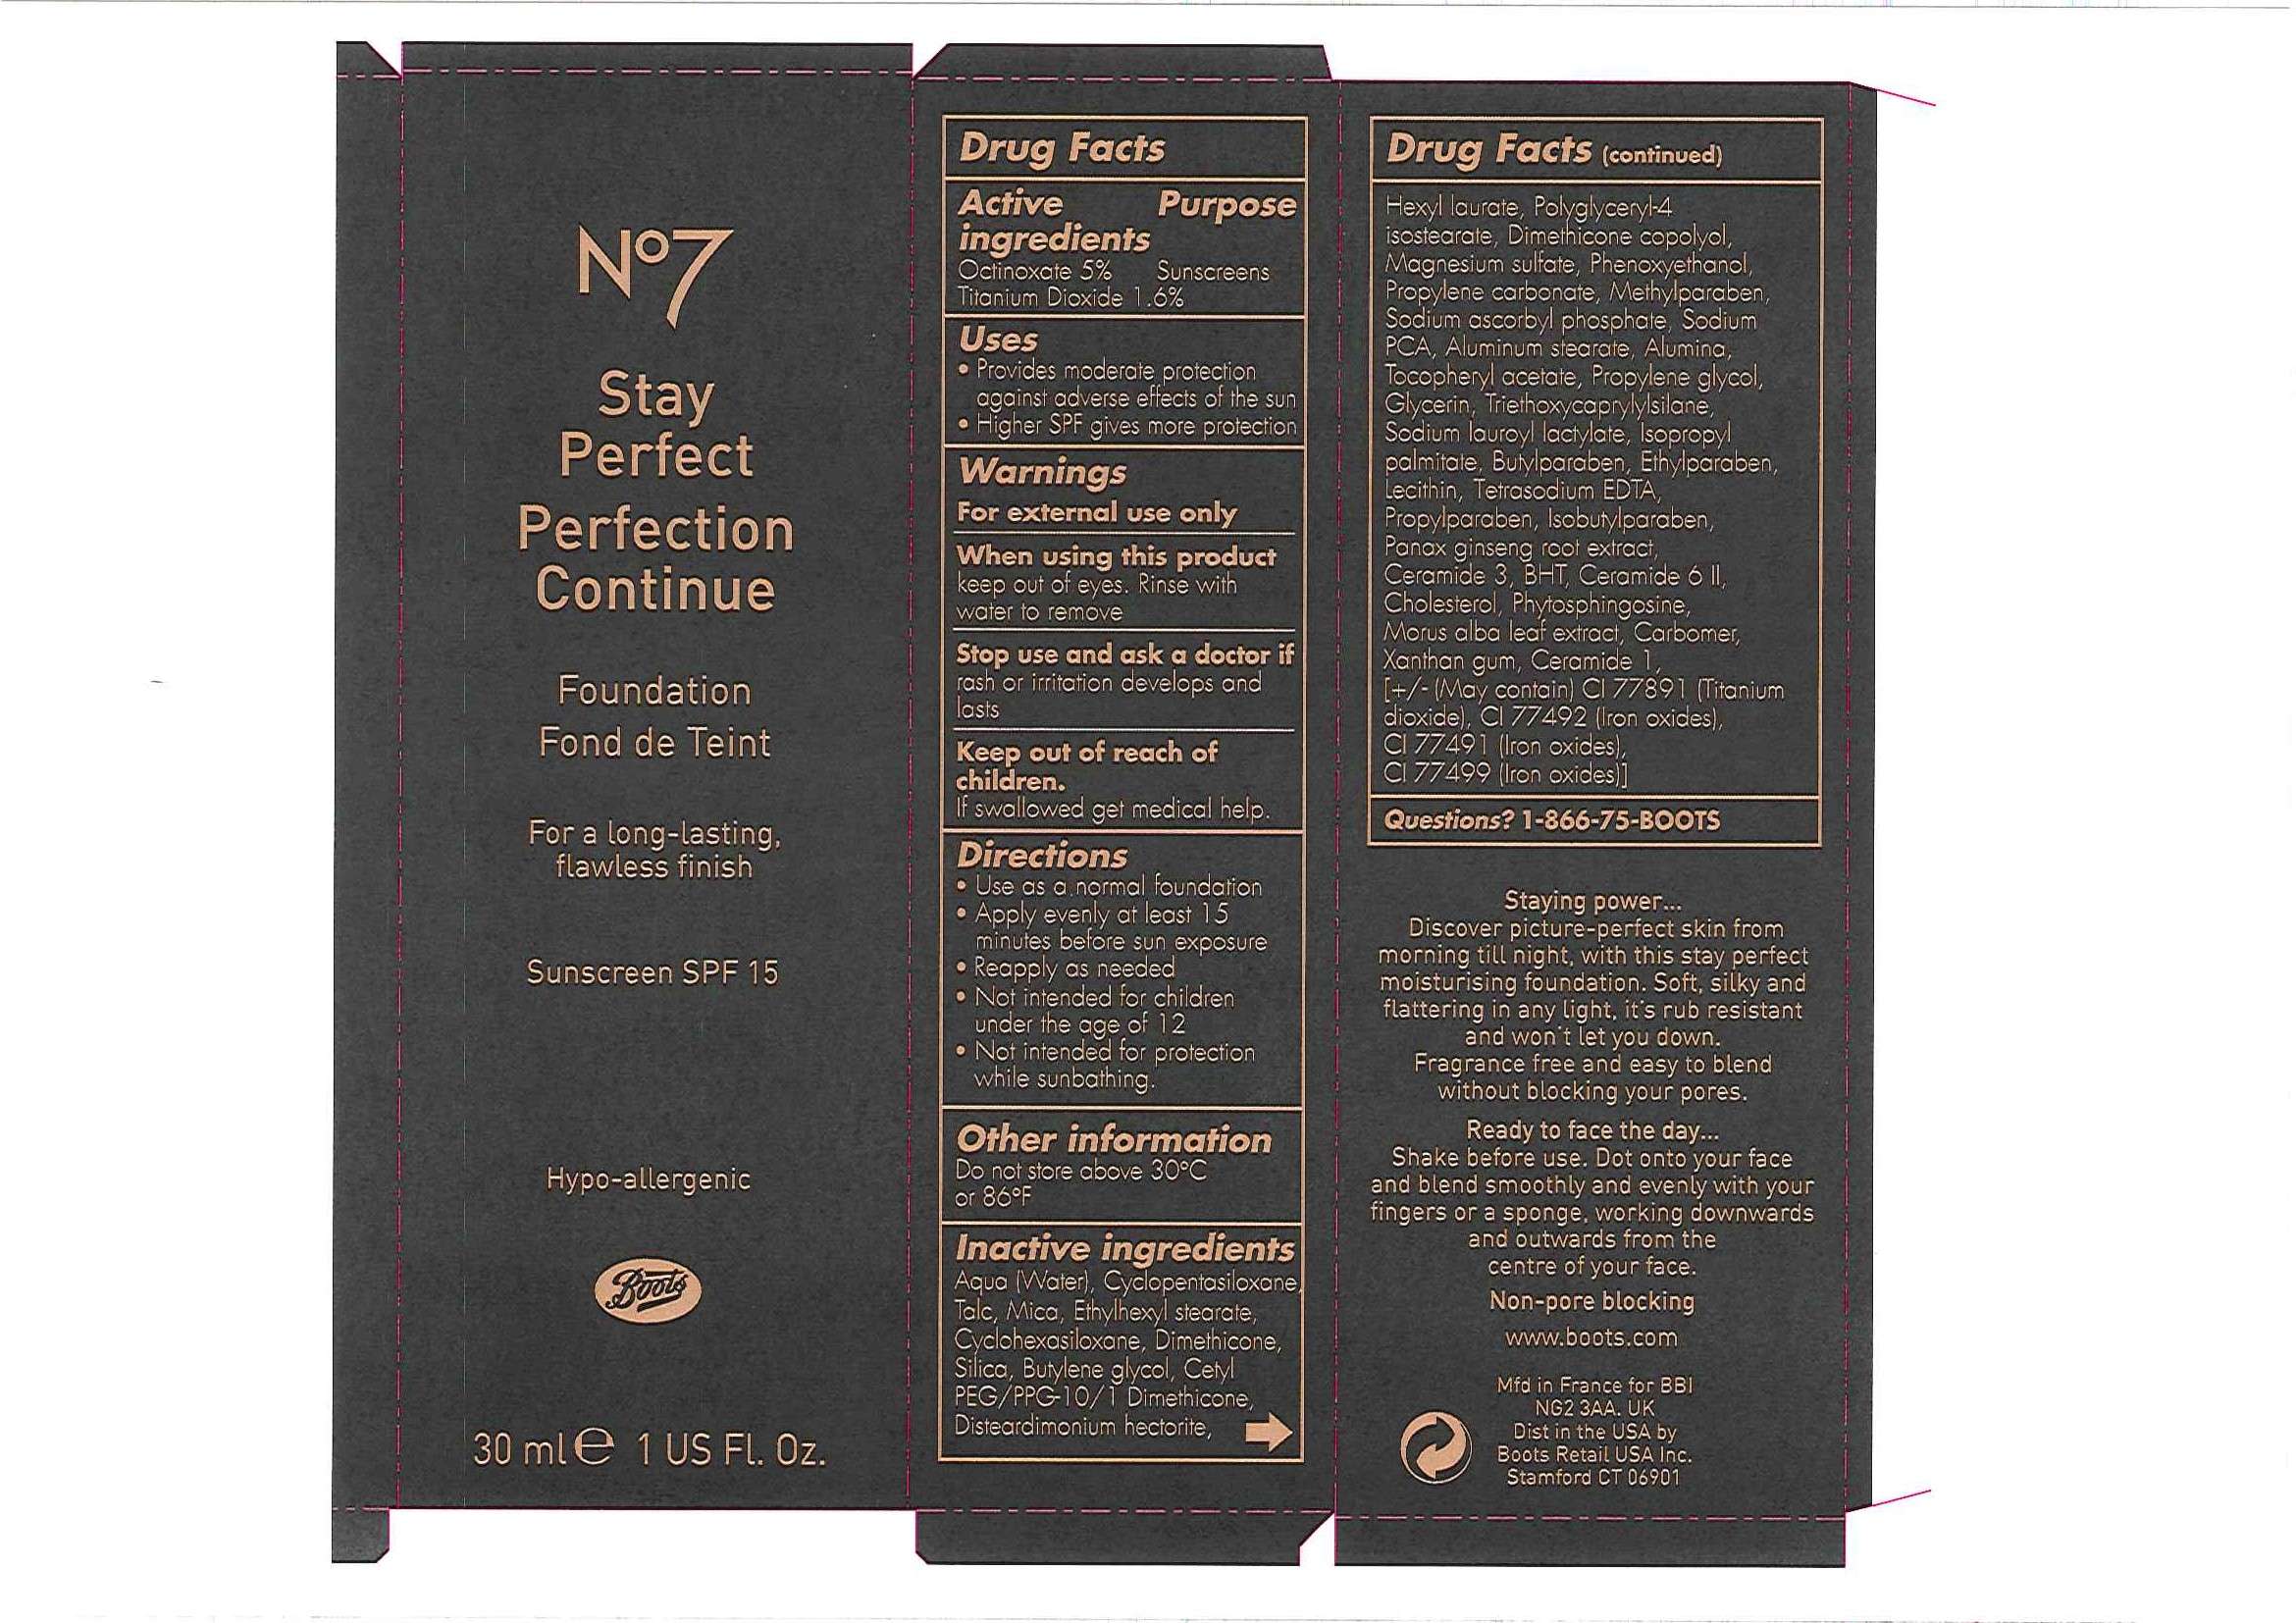 No7 Stay Perfect Foundation Sunscreen SPF 15